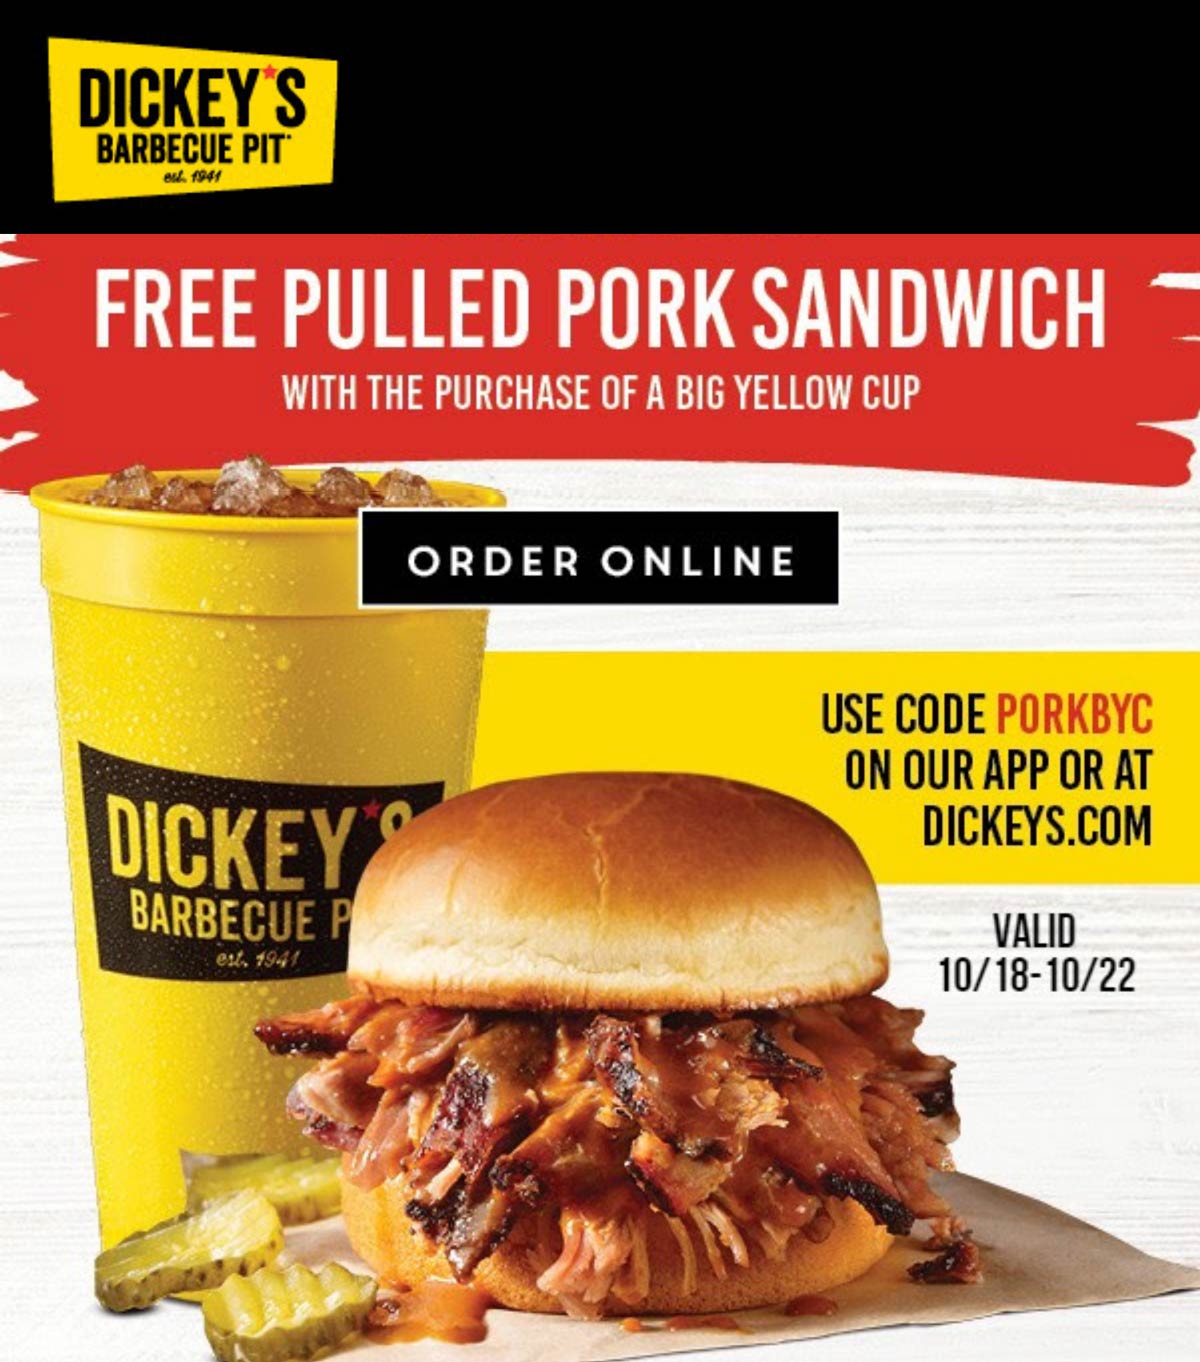 Dickeys Barbecue Pit restaurants Coupon  Free pulled pork sandwich with your yellow cup at Dickeys Barbecue Pit via promo code PORKBYC #dickeysbarbecuepit 